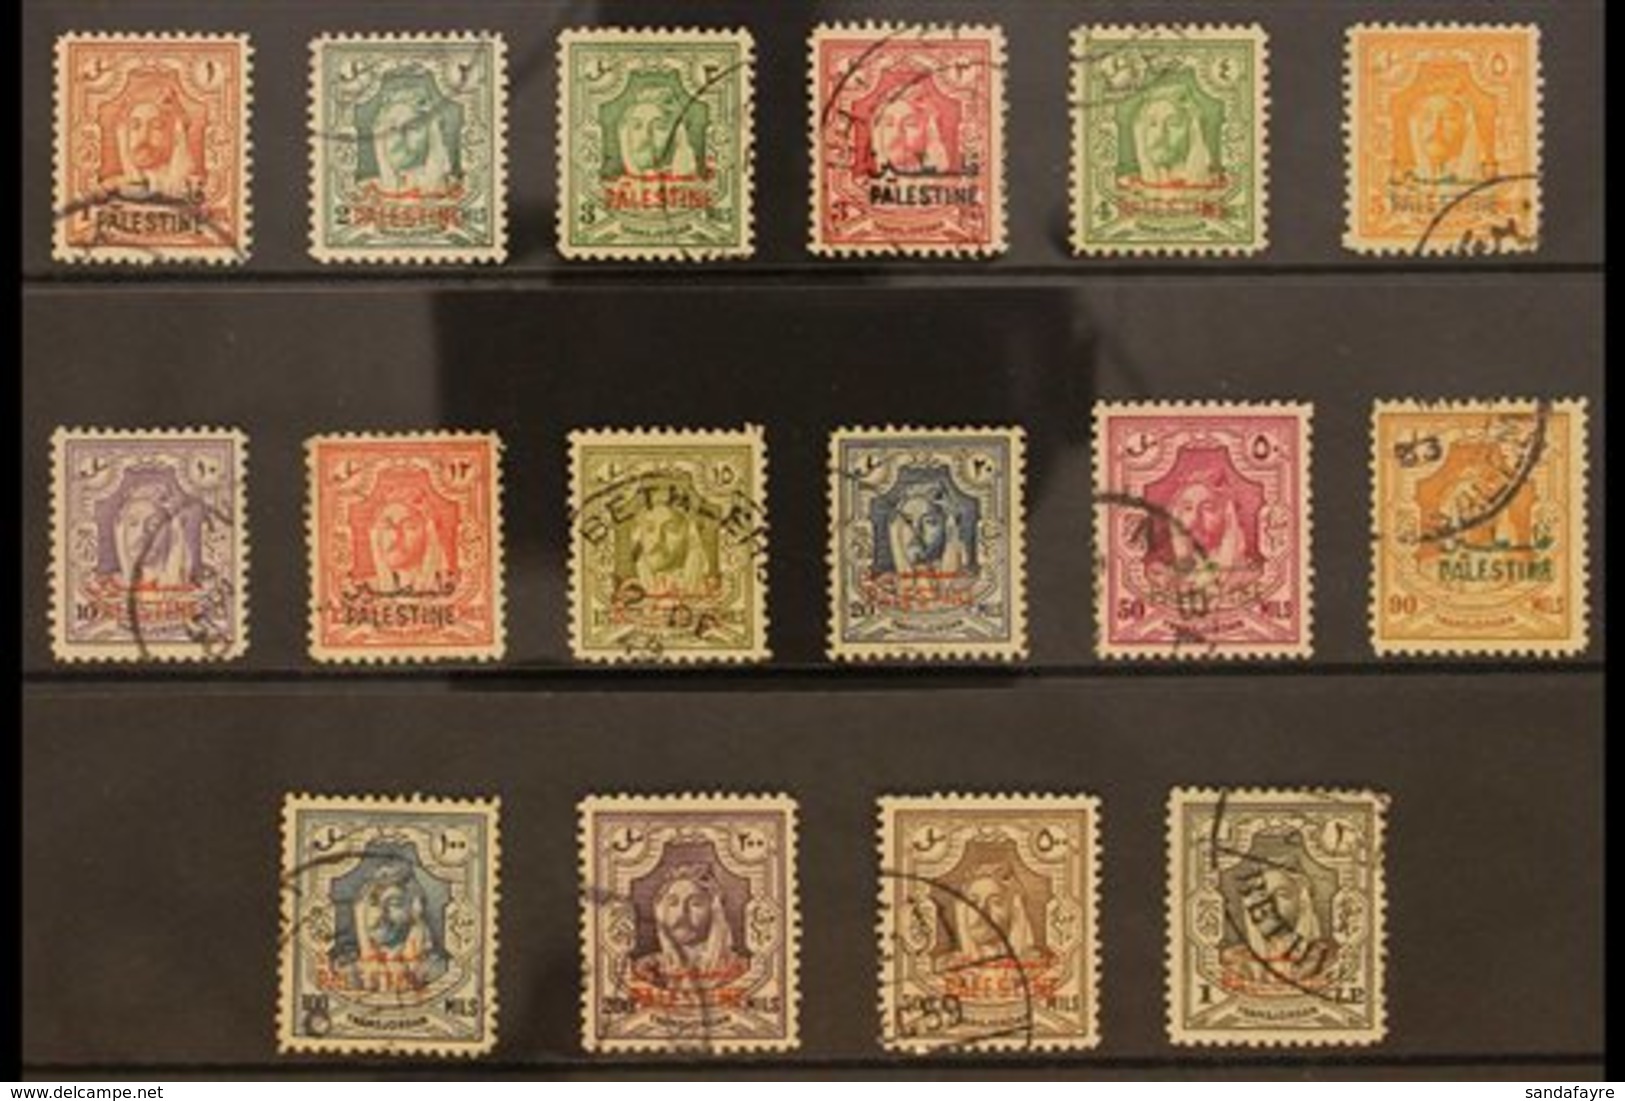 OCCUPATION OF PALESTINE 1948 Jordan Stamps Opt'd "PALESTINE", SG P1/16, Very Fine Used (16 Stamps) For More Images, Plea - Jordan